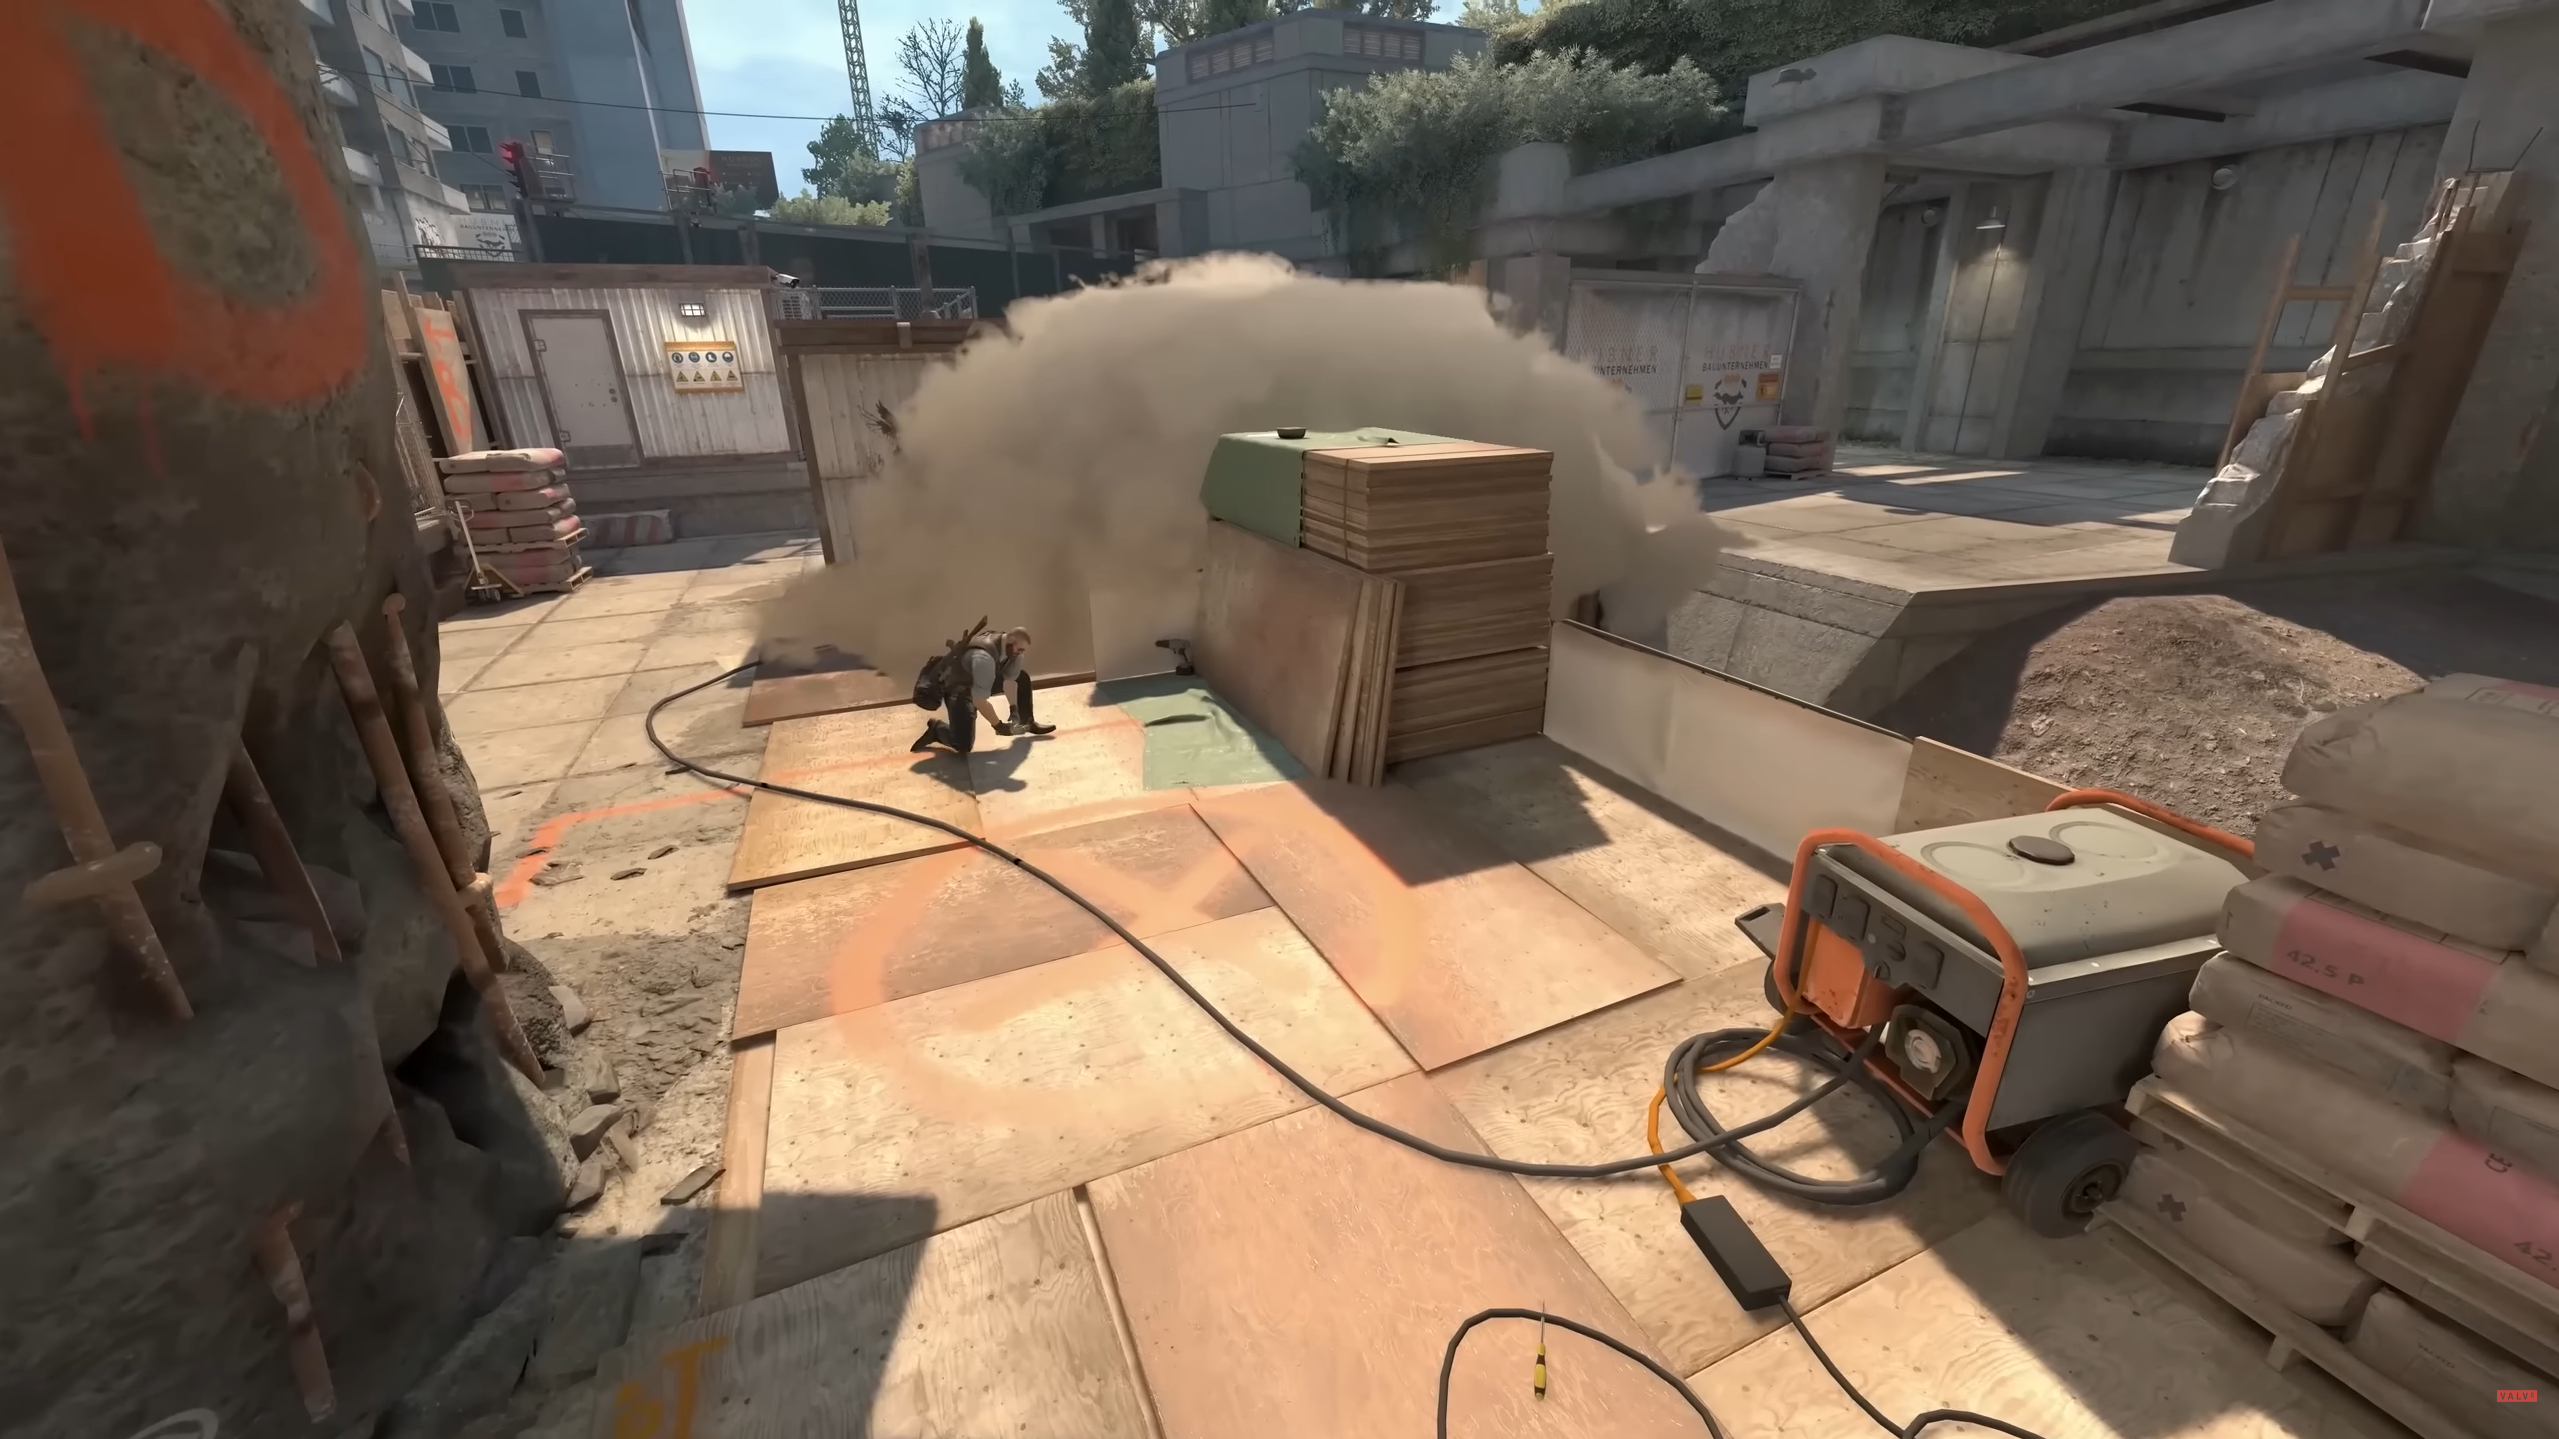 Will CS:GO skins carry over to Counter-Strike 2? - Dot Esports